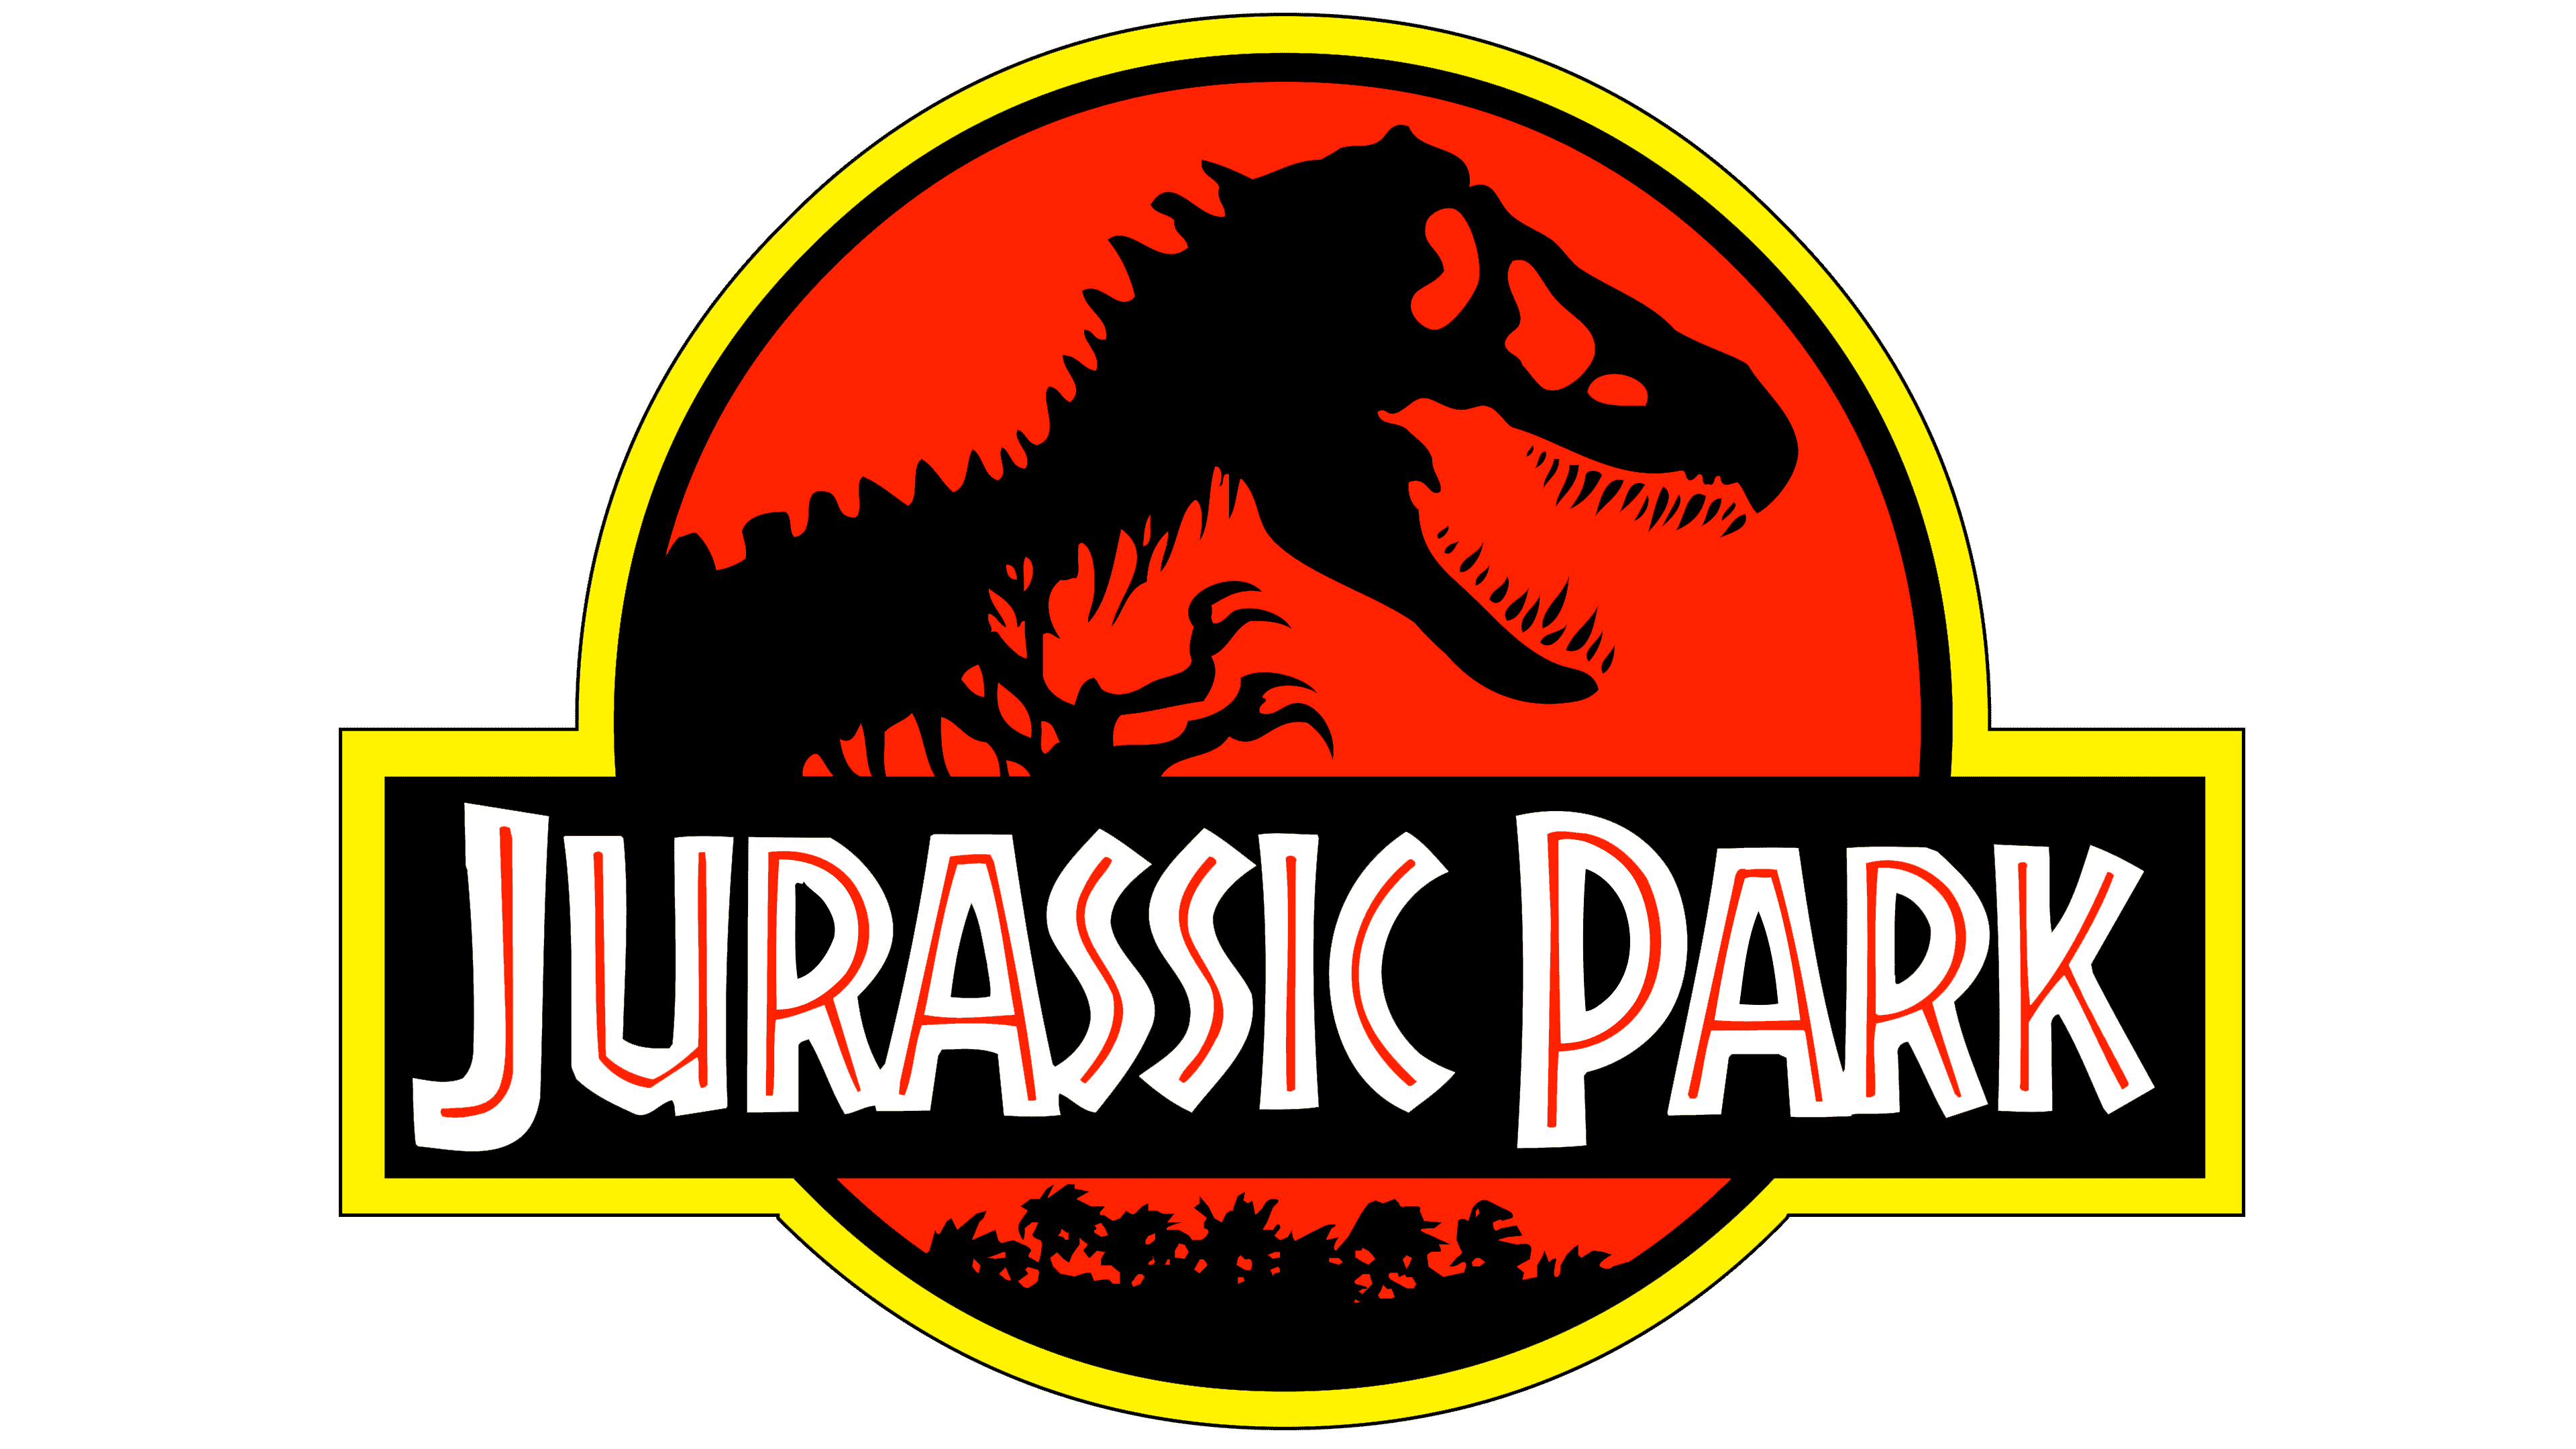 Jurassic Park Logo The Most Famous Brands And Company Logos In The World